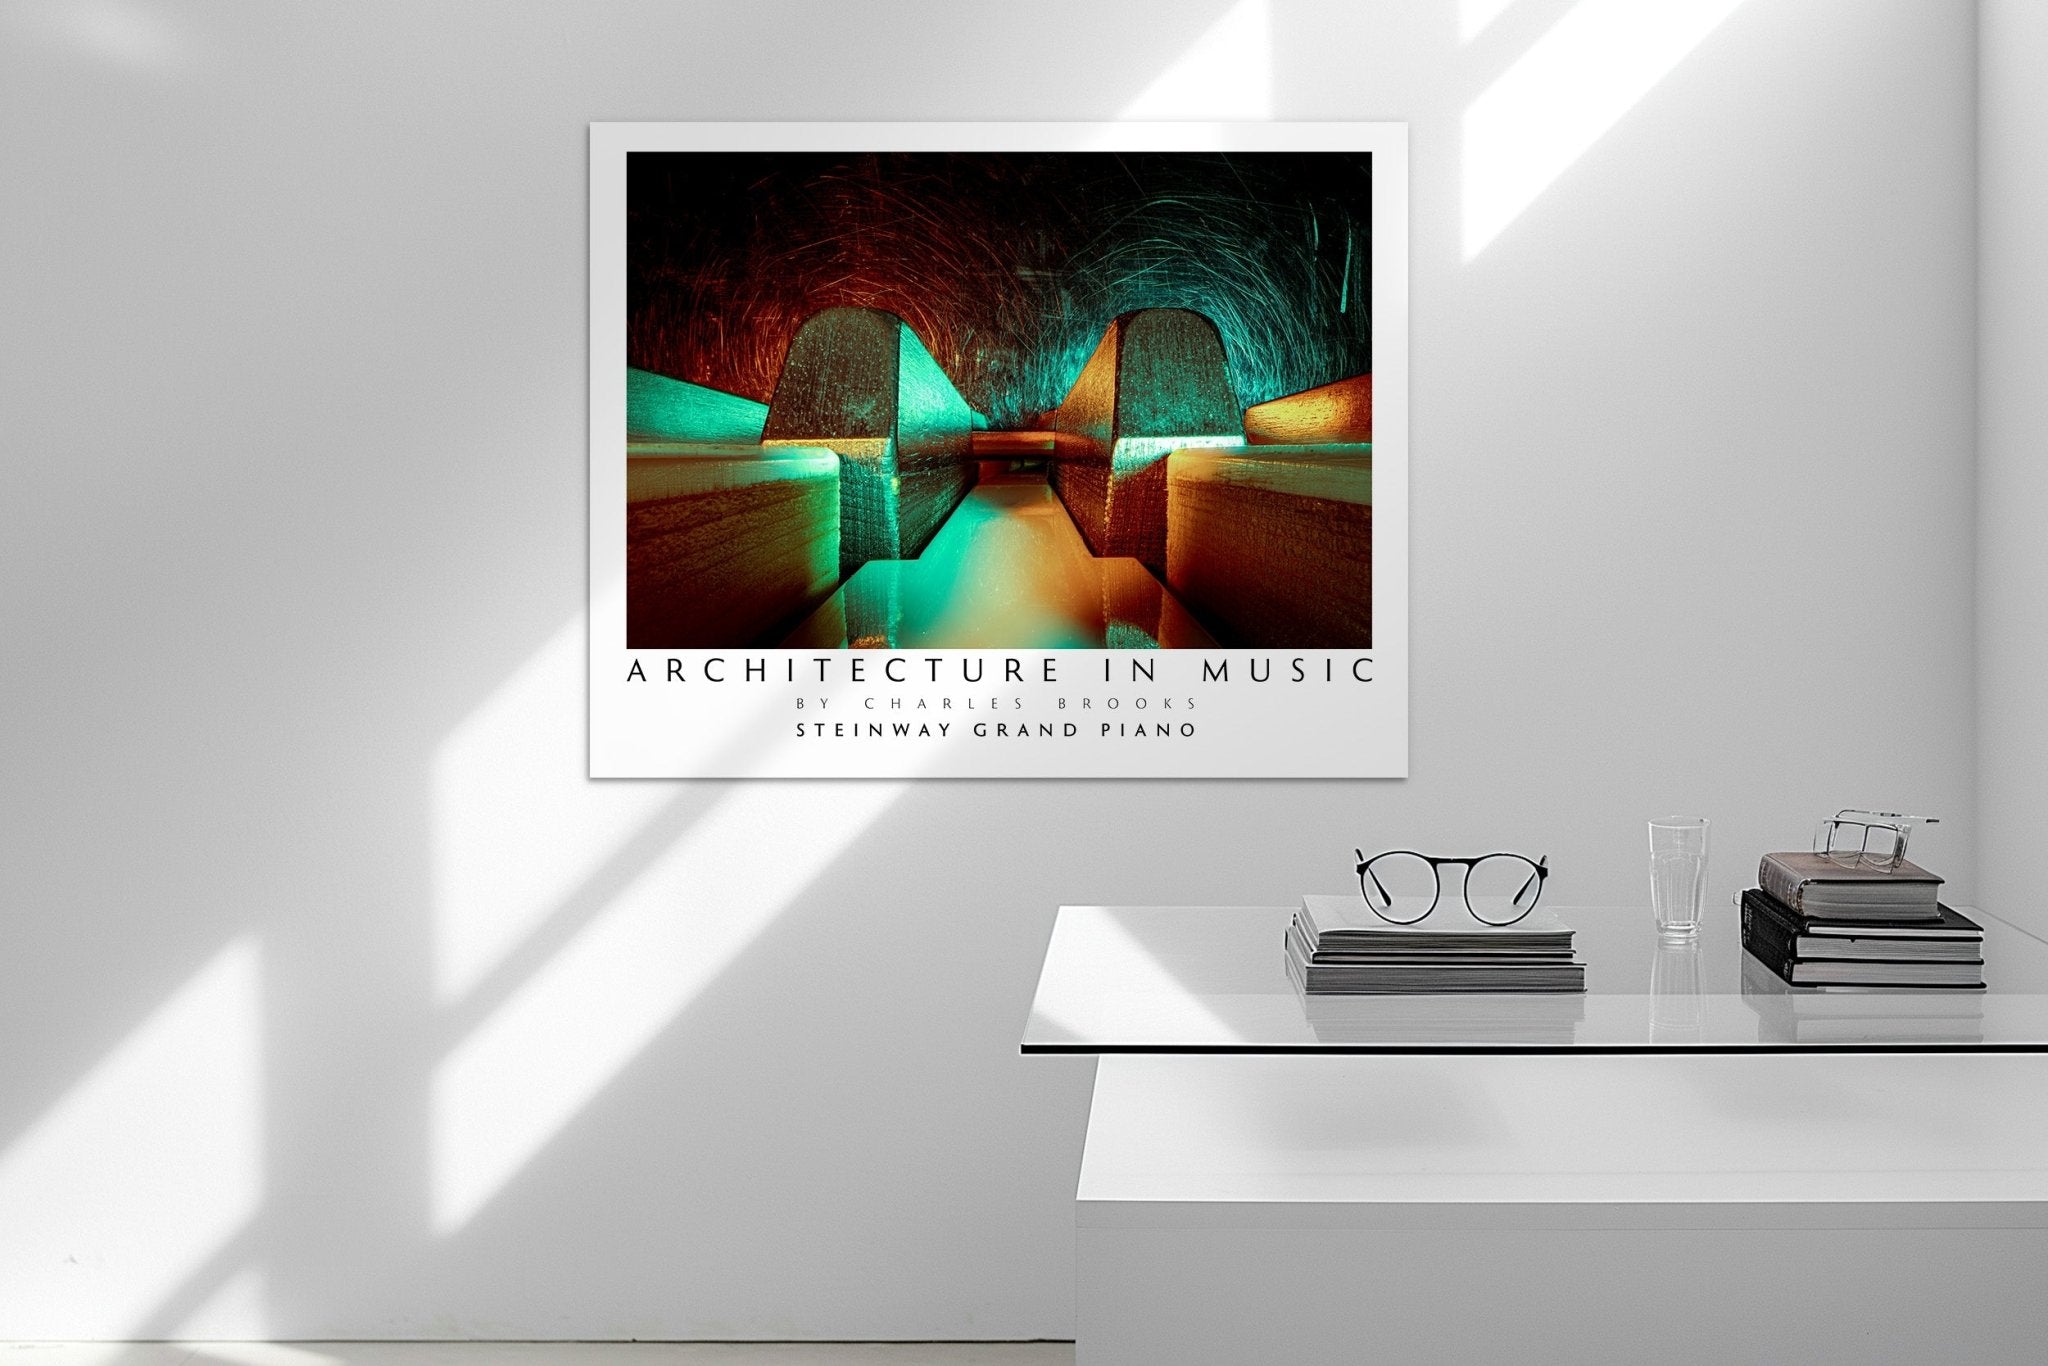 Photo of The Exquisite Architecture of Steinway, Part 4. High Quality Poster - Giclée Poster Print - Architecture In Music